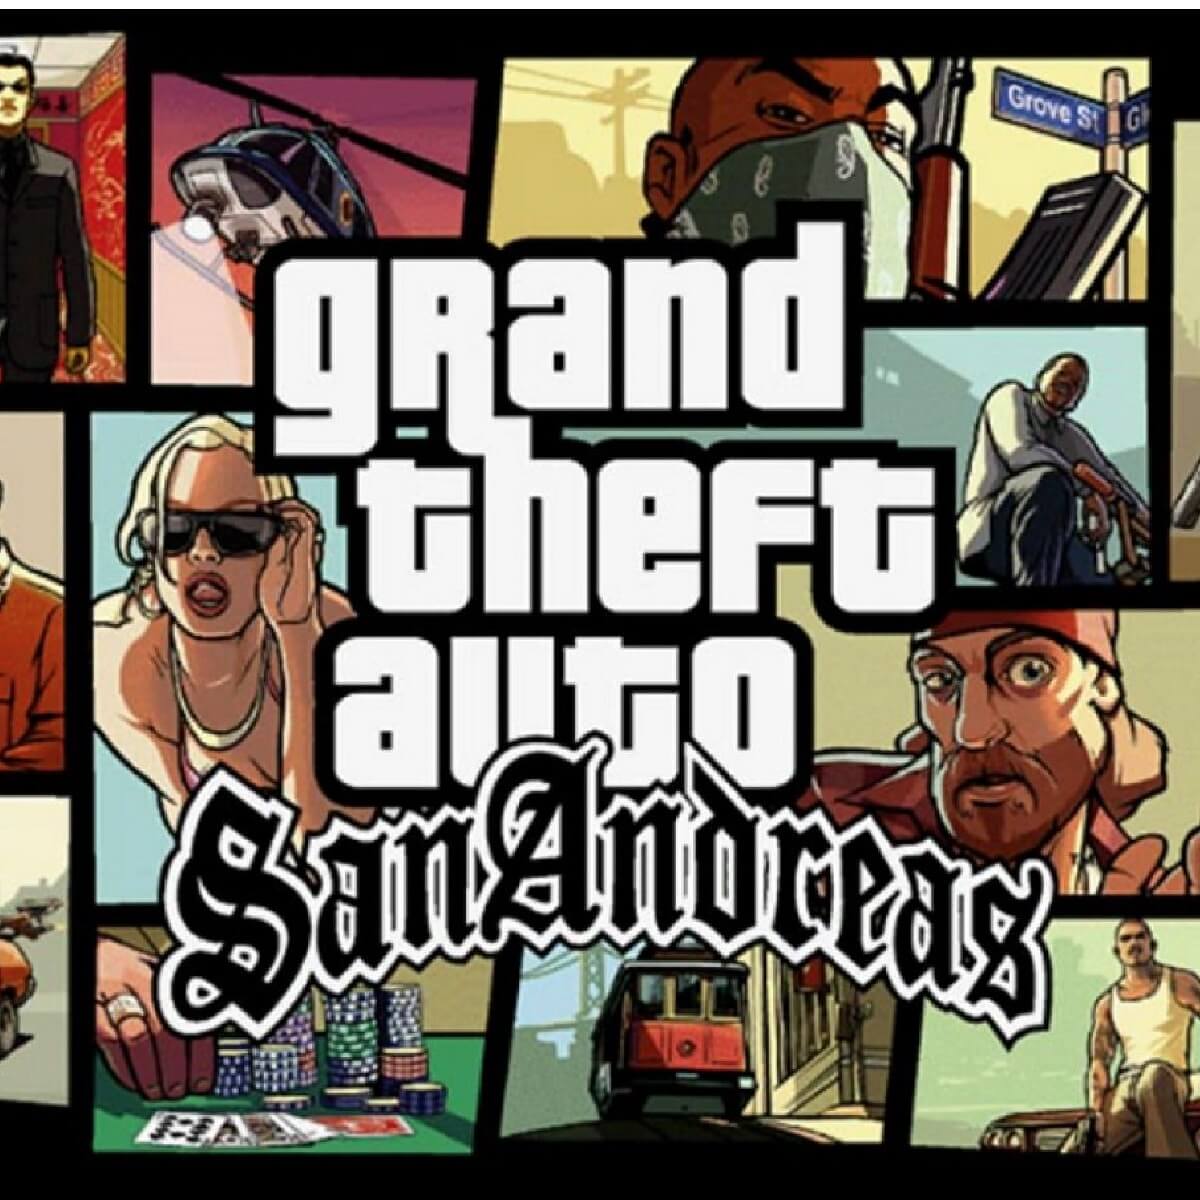 gta san andreas for pc free download windows 10